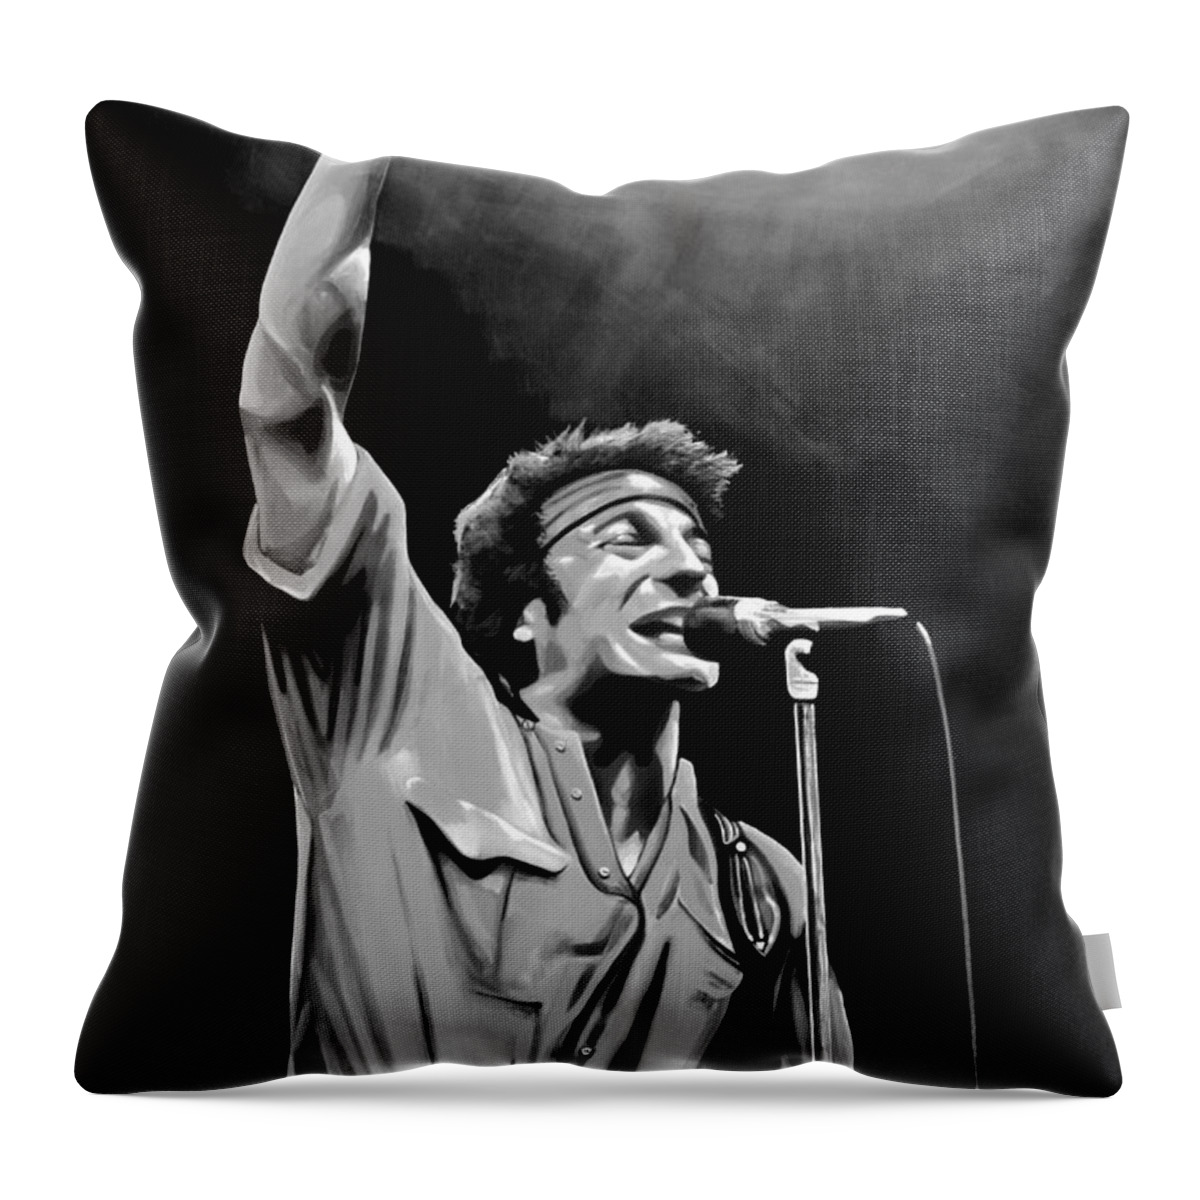 Bruce Springsteen Throw Pillow featuring the mixed media Bruce Springsteen by Meijering Manupix